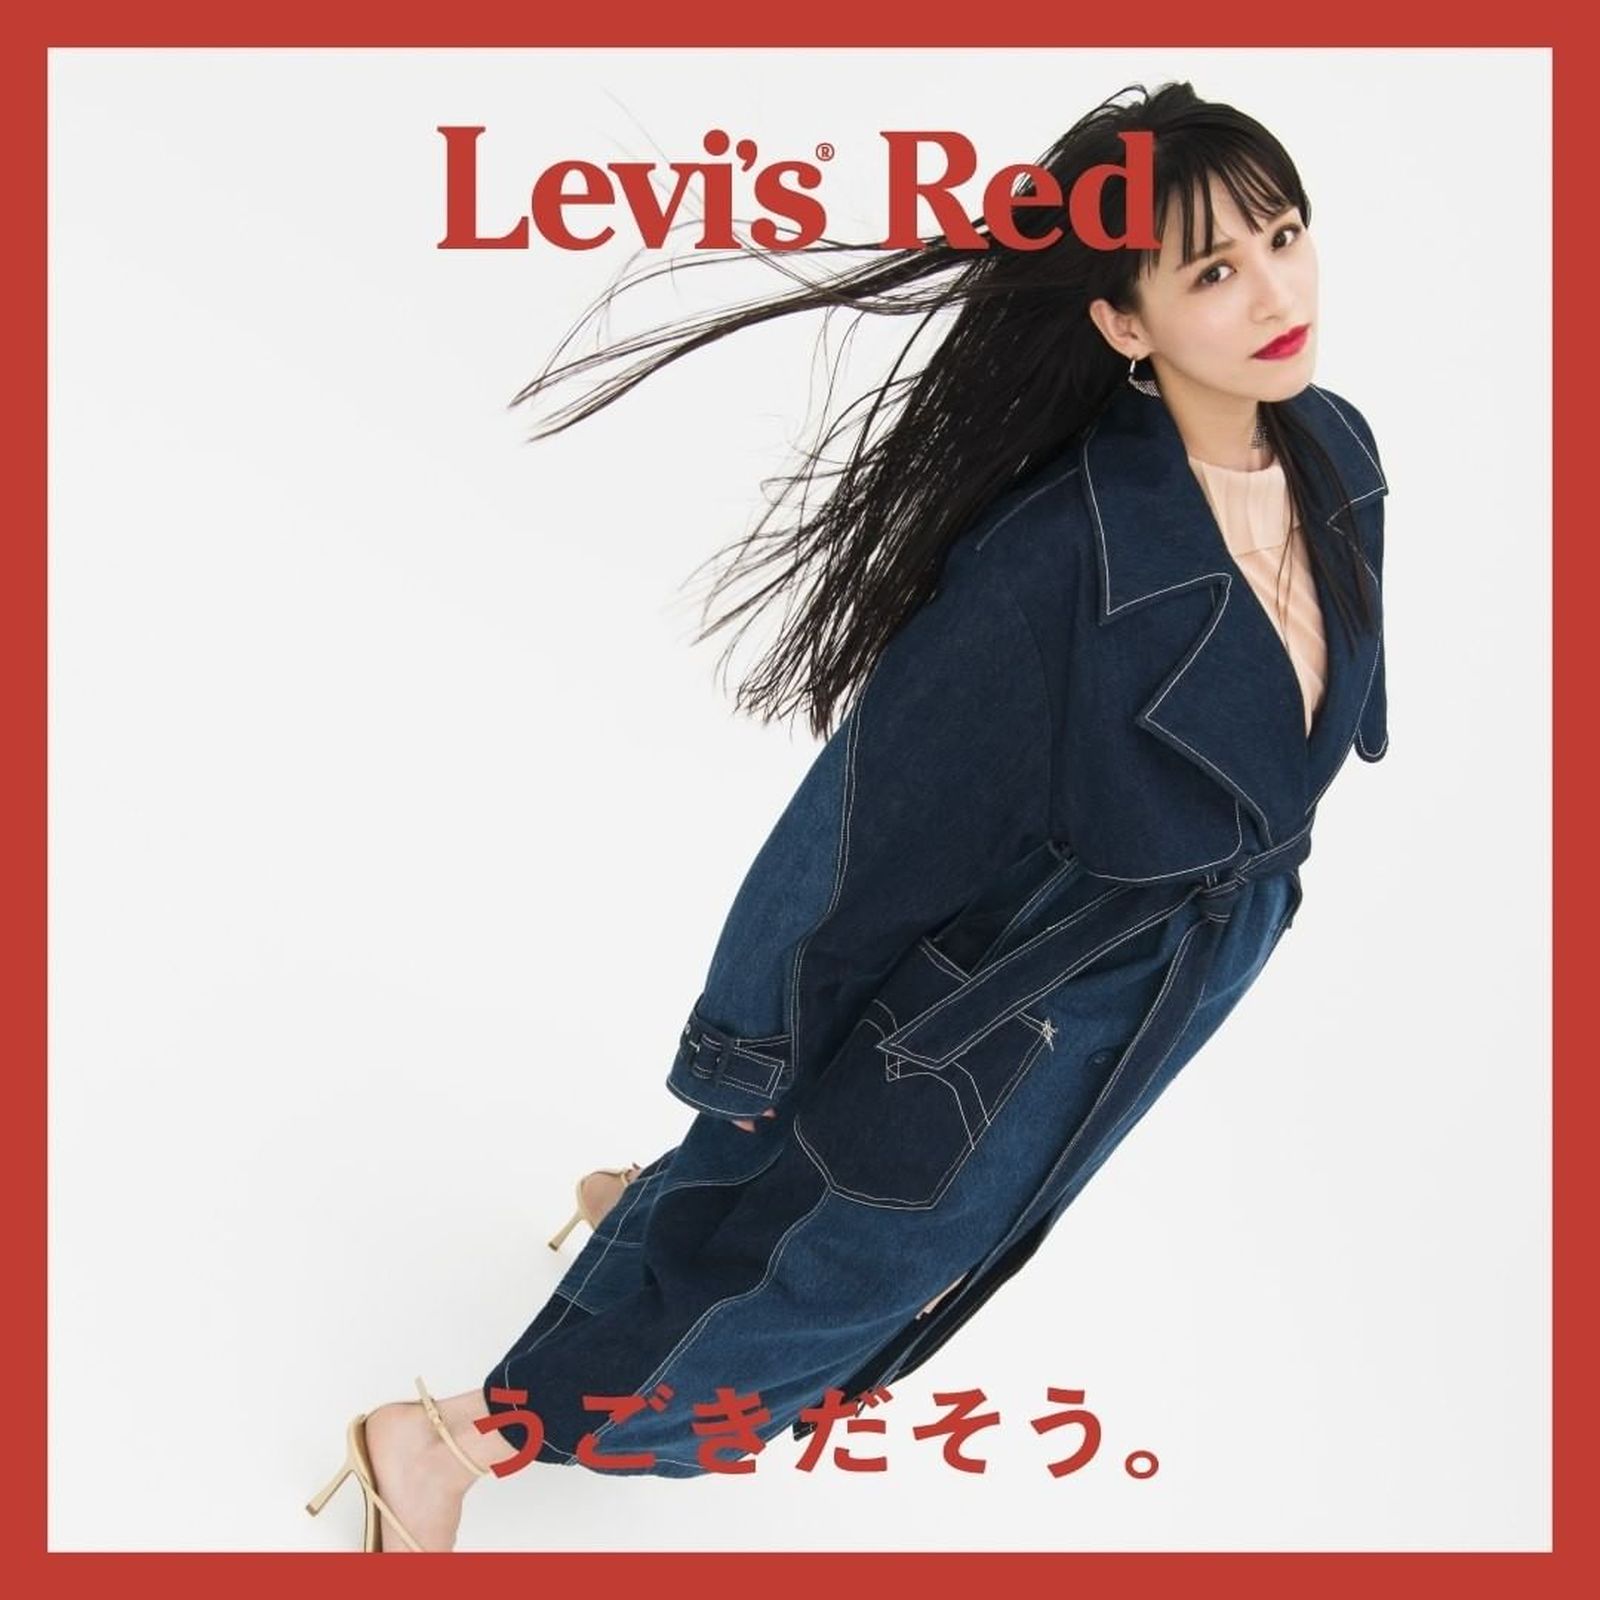 levis-red-fw21-collection (10)